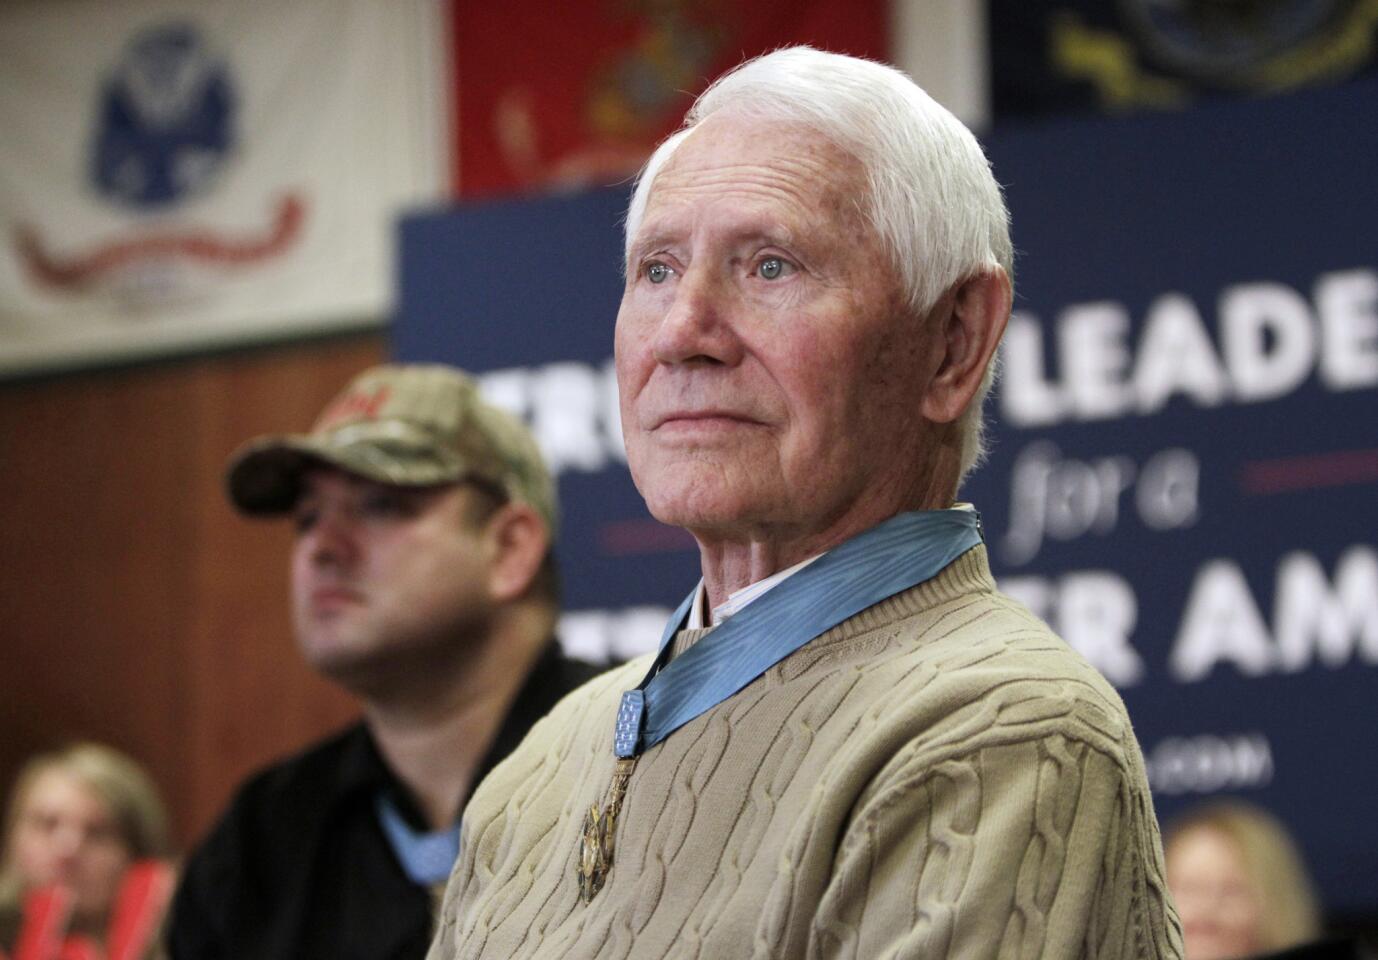 Retired U.S. Air Force Col. Leo K. Thorsness, seen here in 2016, was a highly decorated Vietnam War pilot who was shot down and held for six years at the "Hanoi Hilton" prisoner camp, where he shared a cell with Sen. John McCain. He died on May 2, 2017, at 85. Read more.